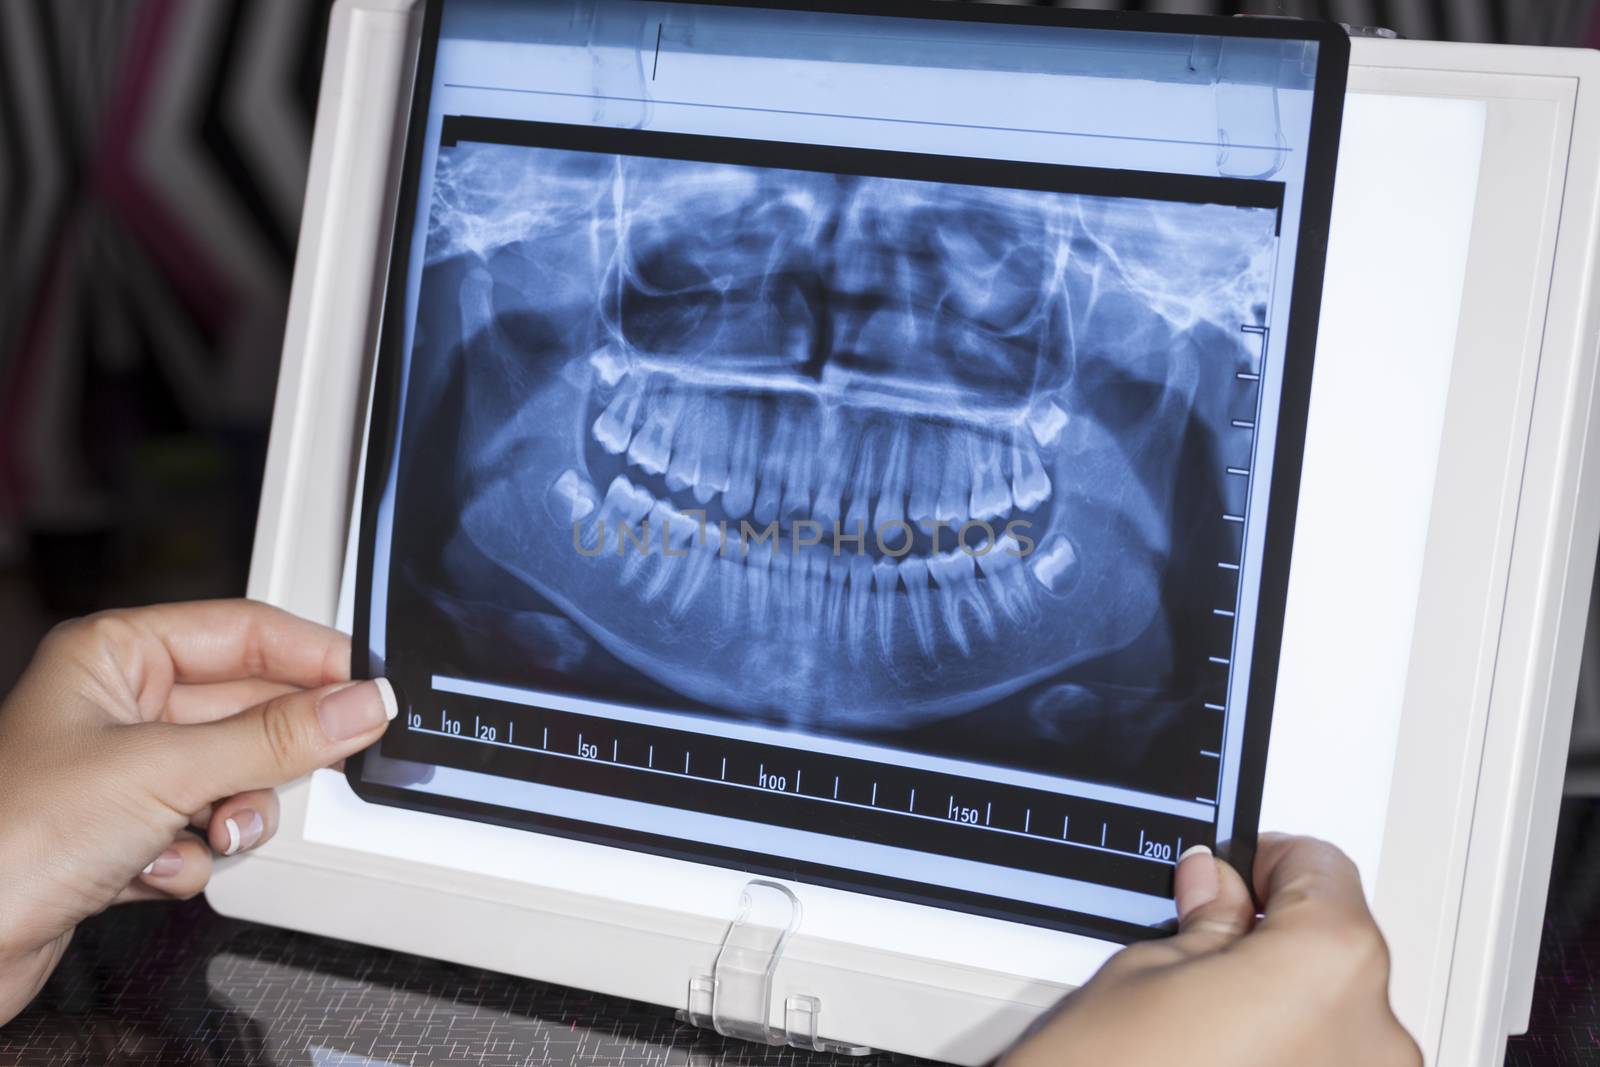 Panoramic Dental X-Ray by orcearo